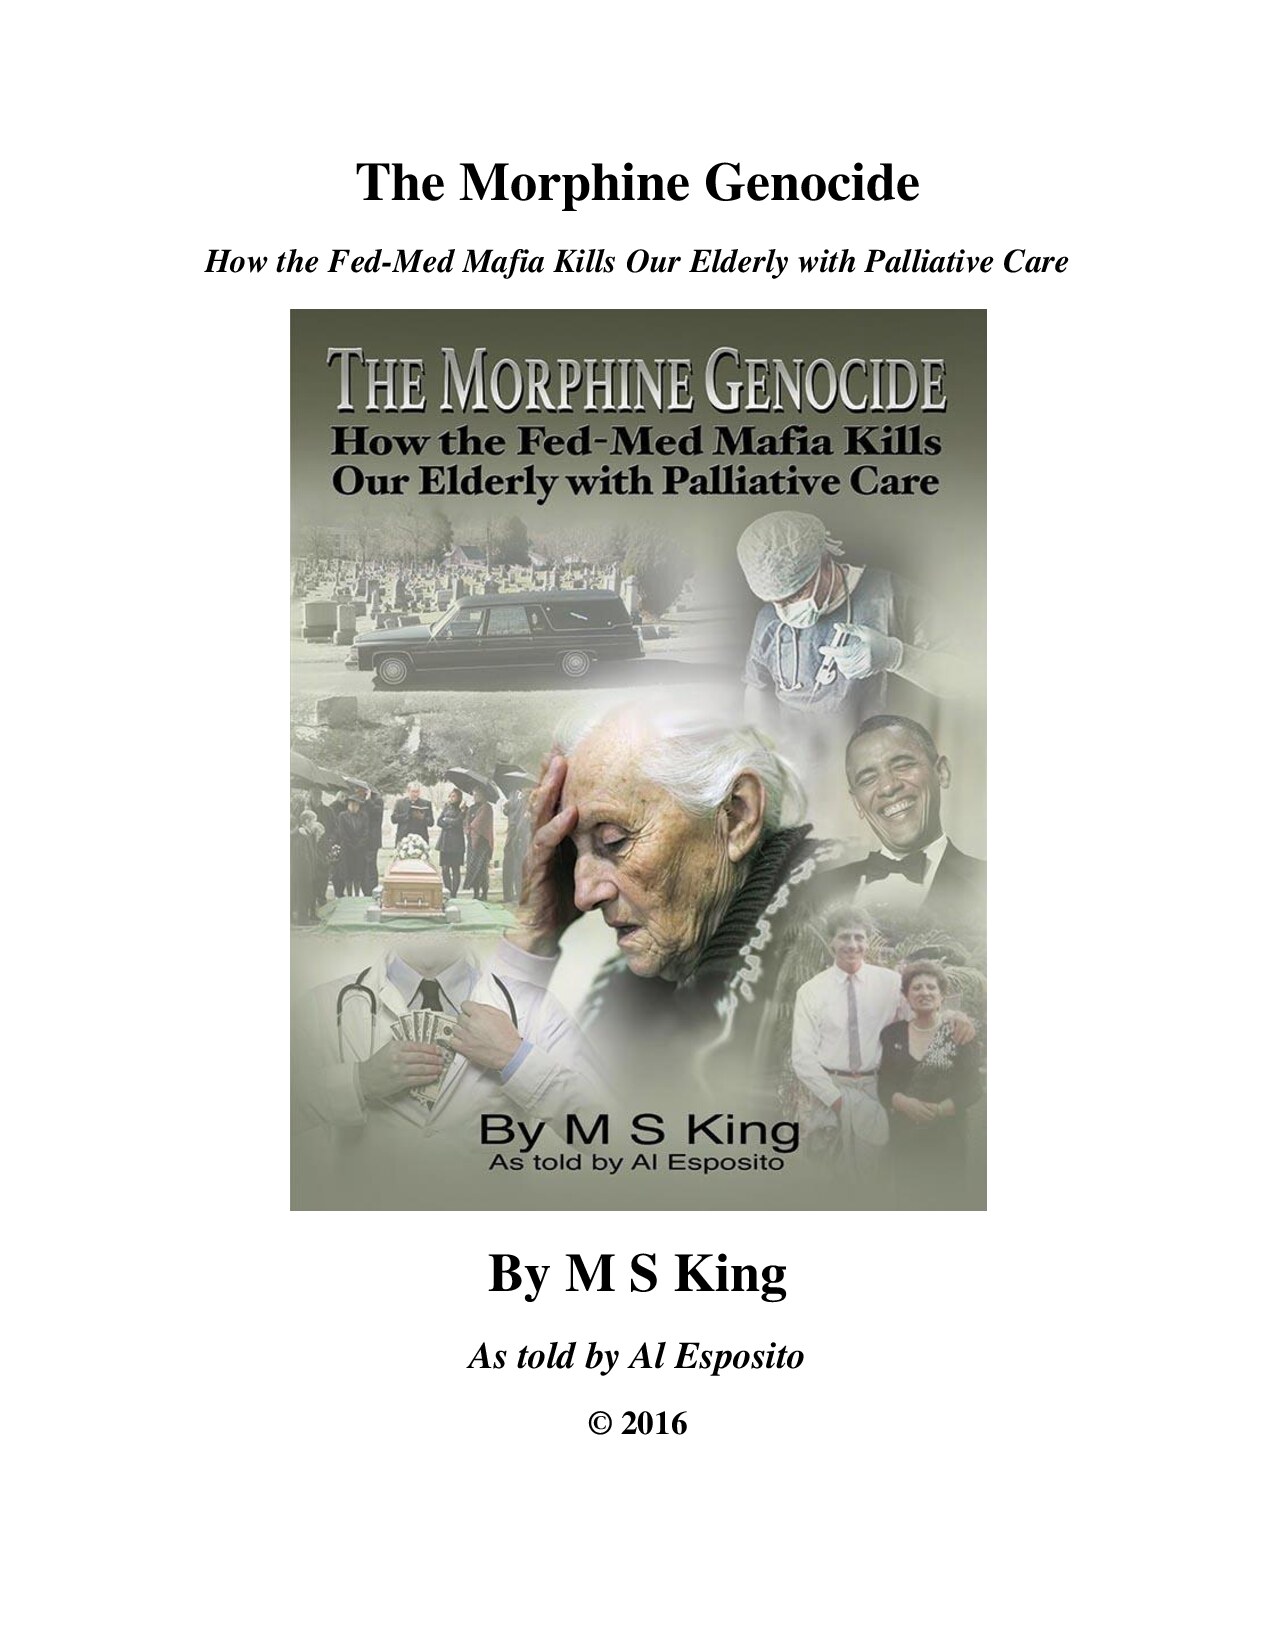 King, Mike S.; The Morphine Genocide - How the Fed-Med Mafia Kills Our Elderly With 'Palliative Care'